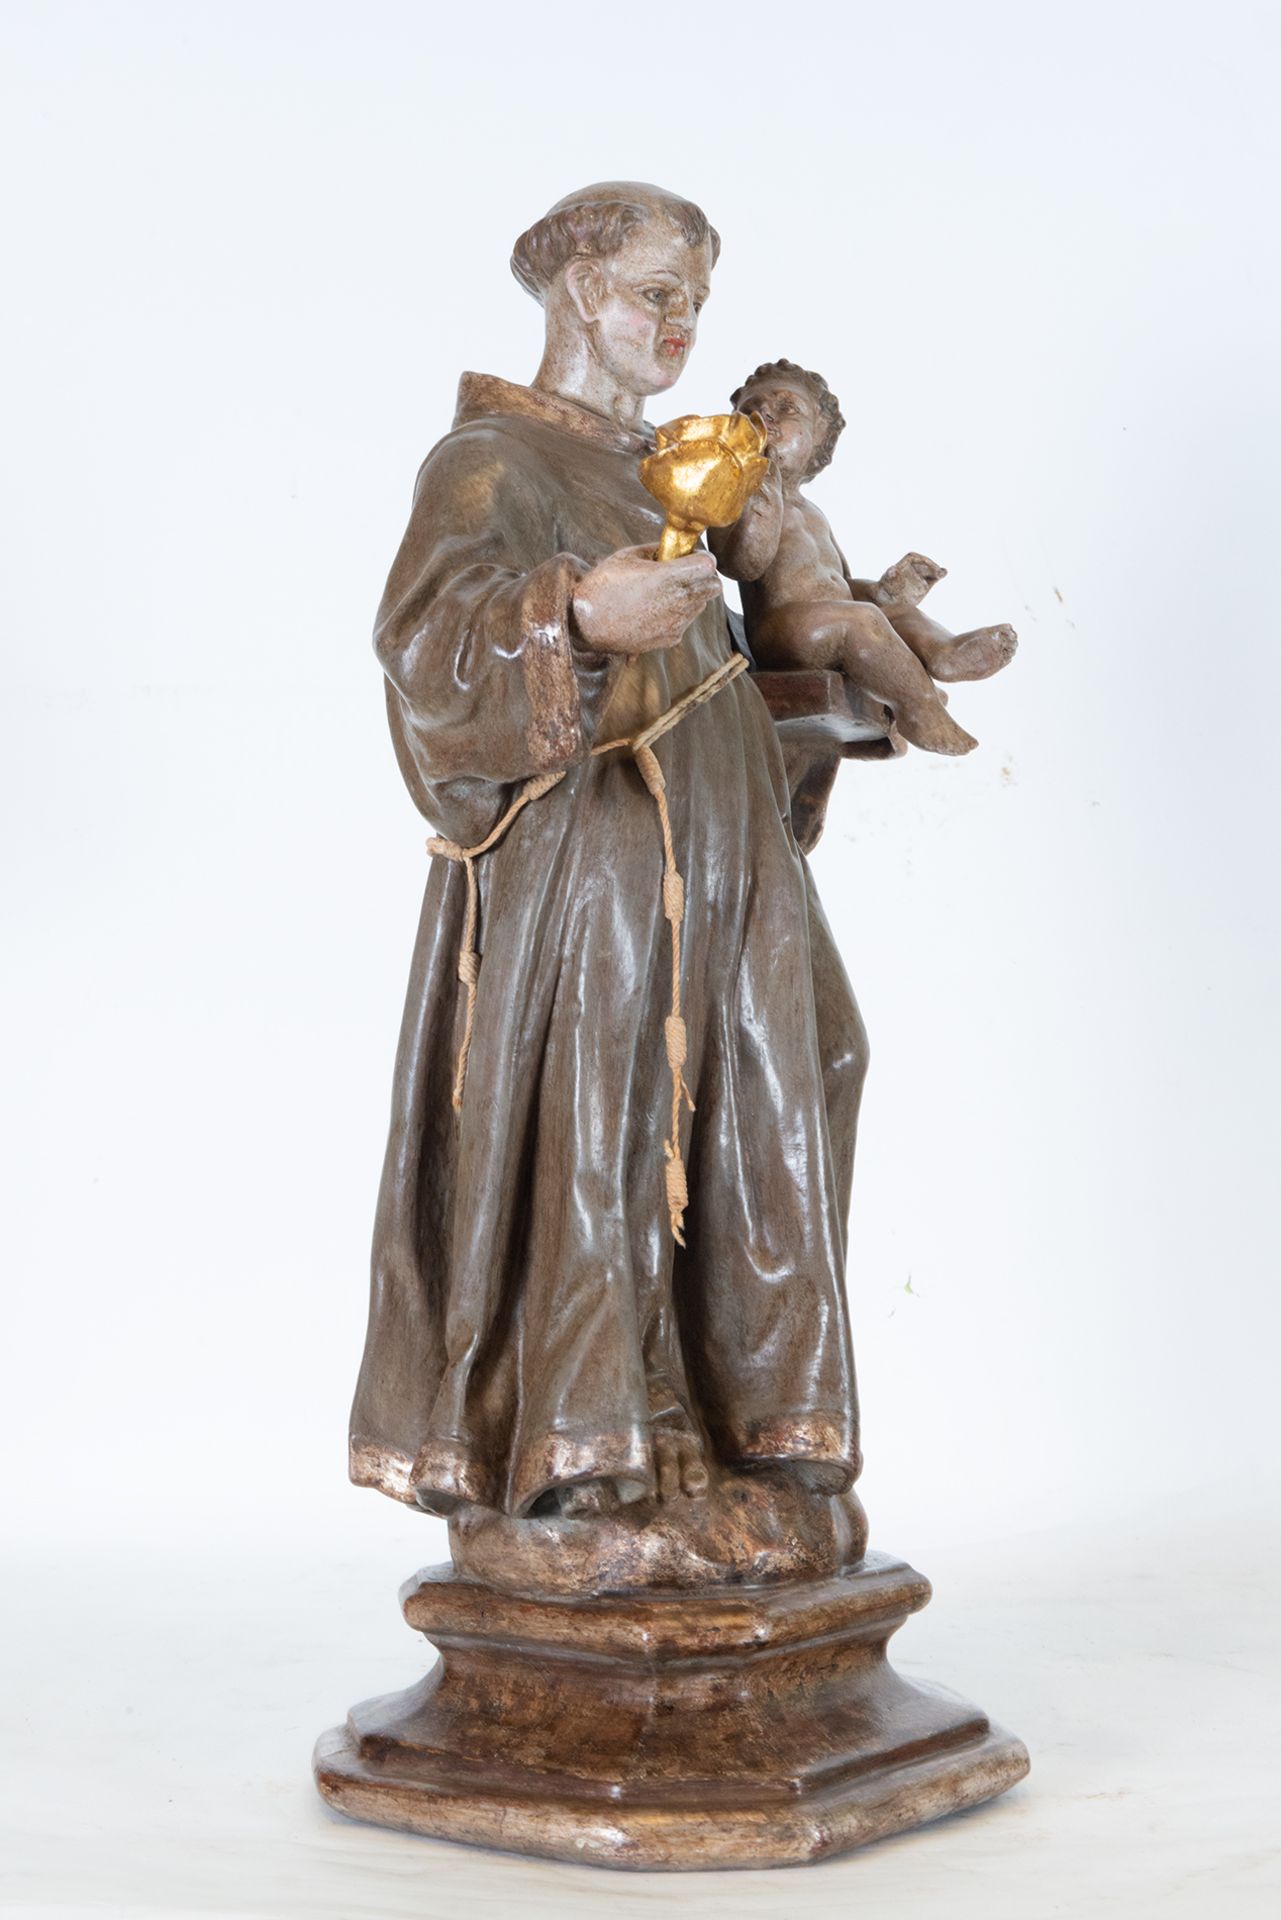 Saint Anthony with the Child Jesus in Arms, Catalan school of the 18th century - Image 4 of 5